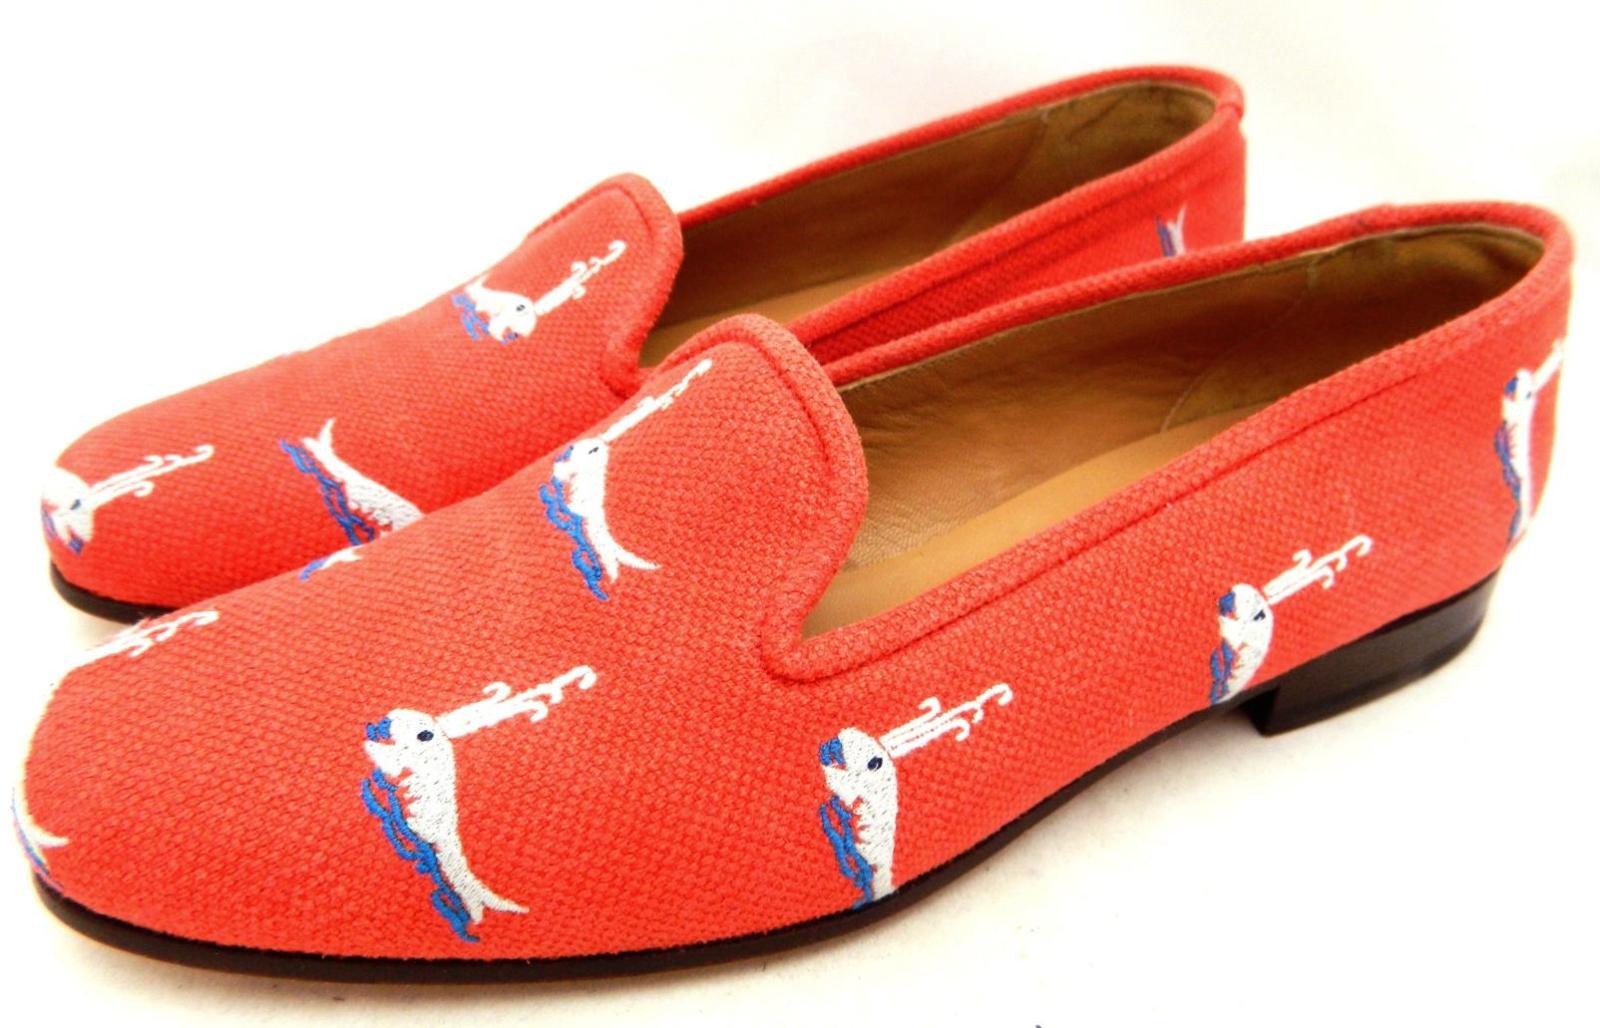 j crew red shoes